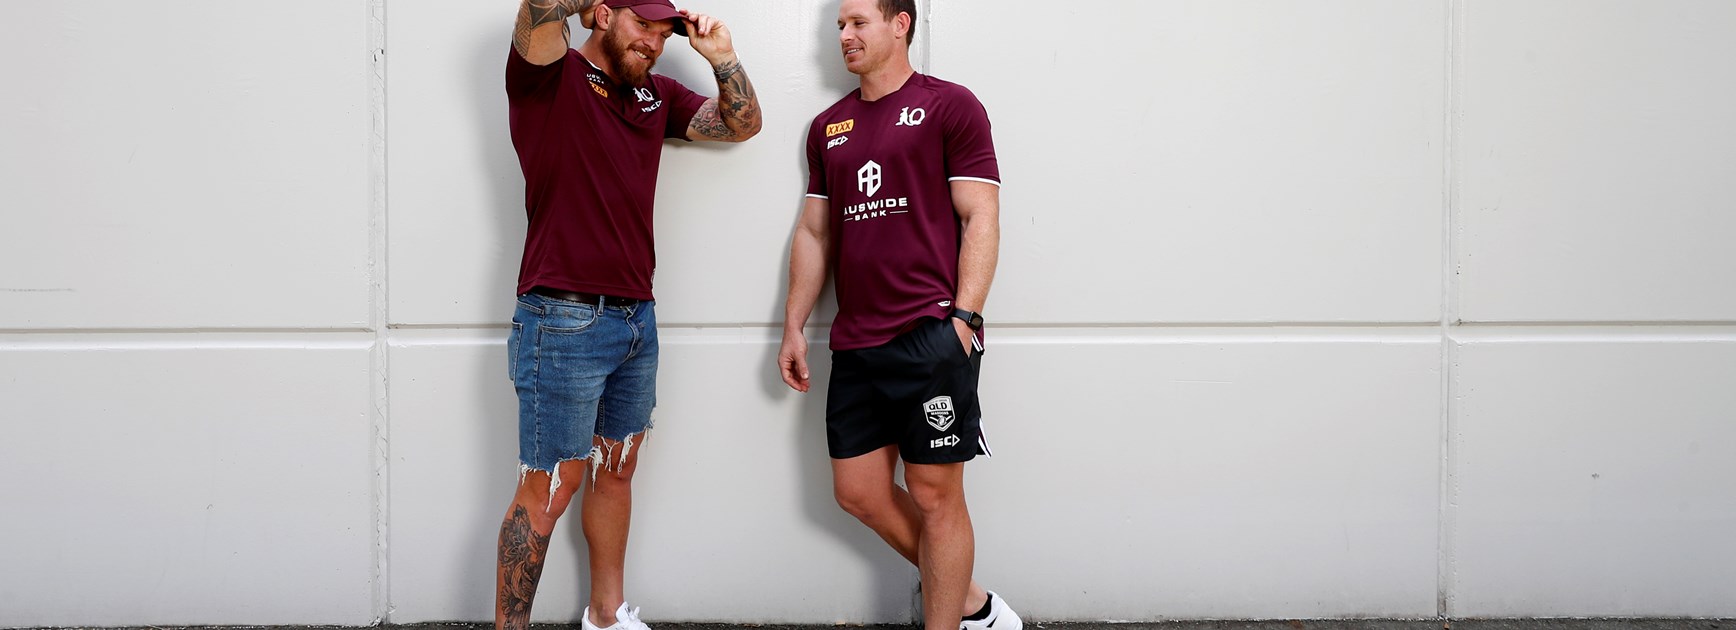 Fans flock to support Maroons Shop